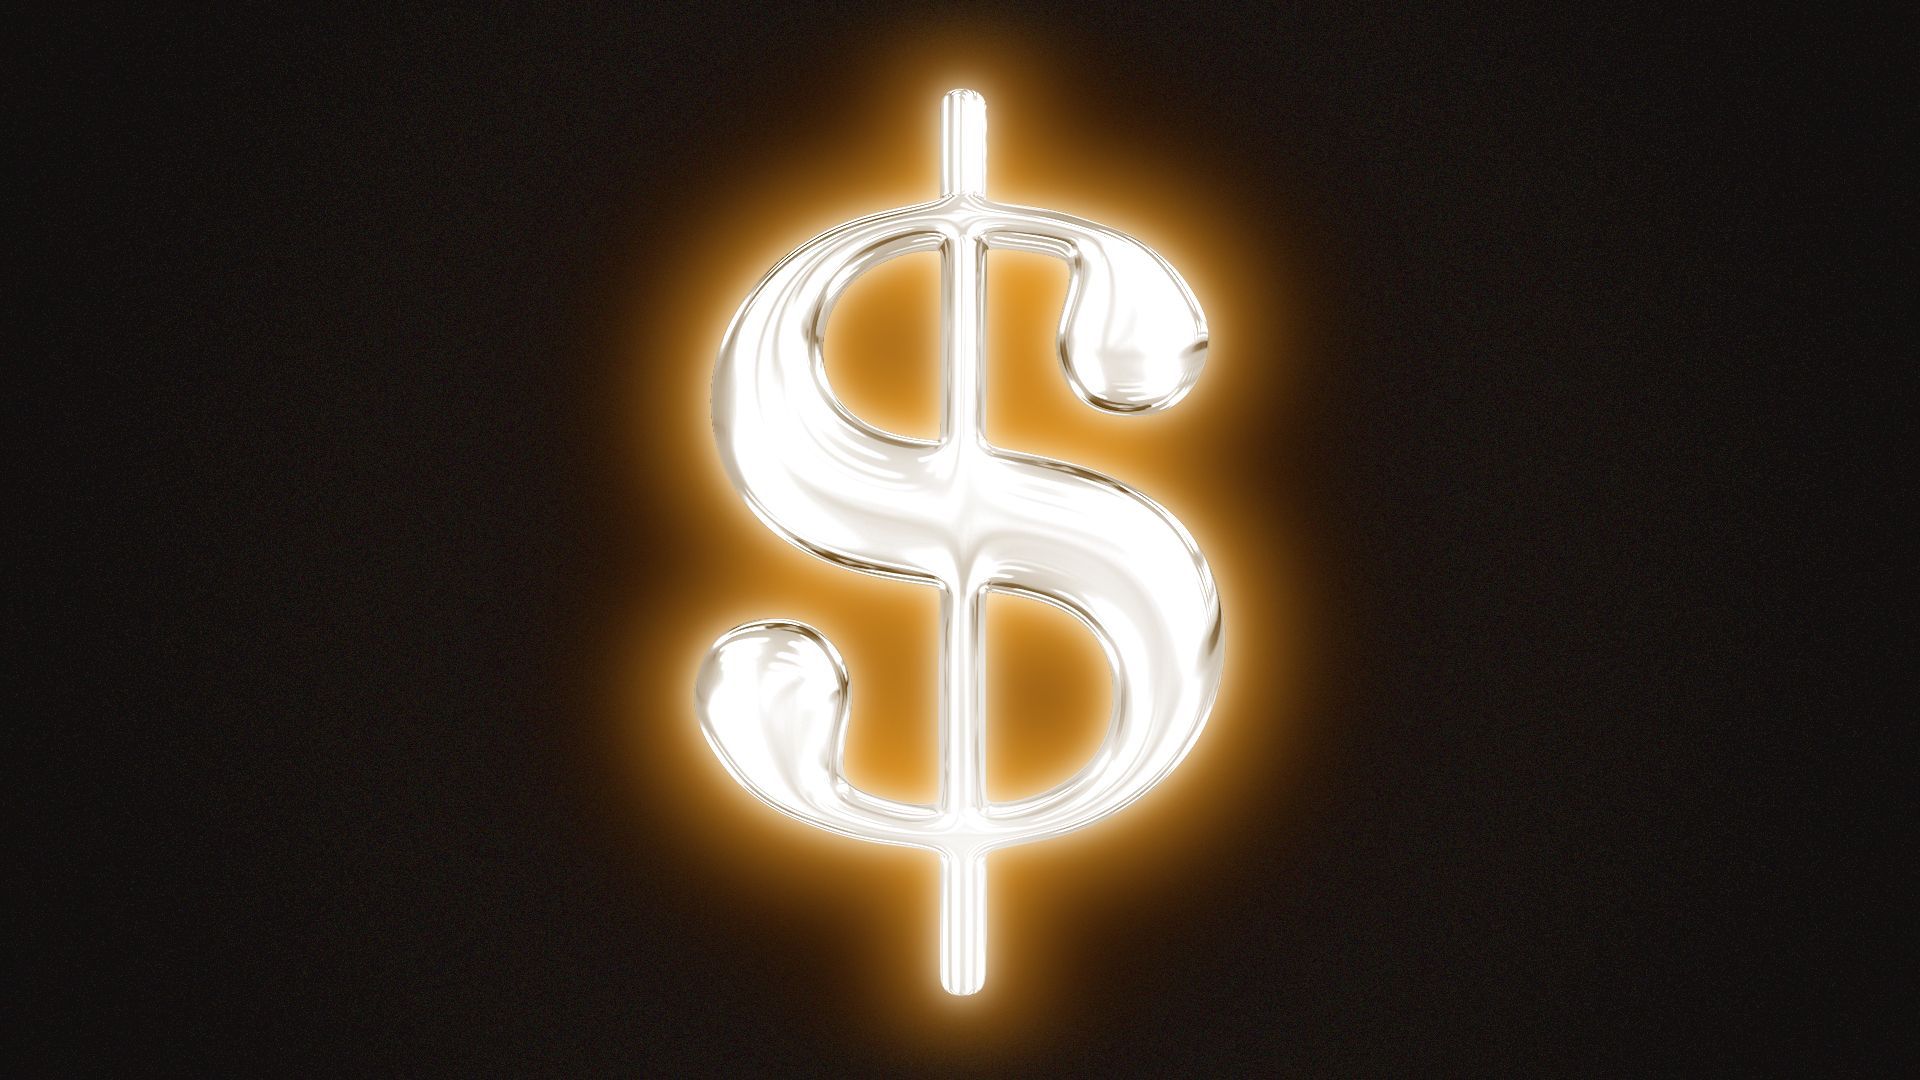 Illustration of a dollar sign made out of metal, and glowing very bright.